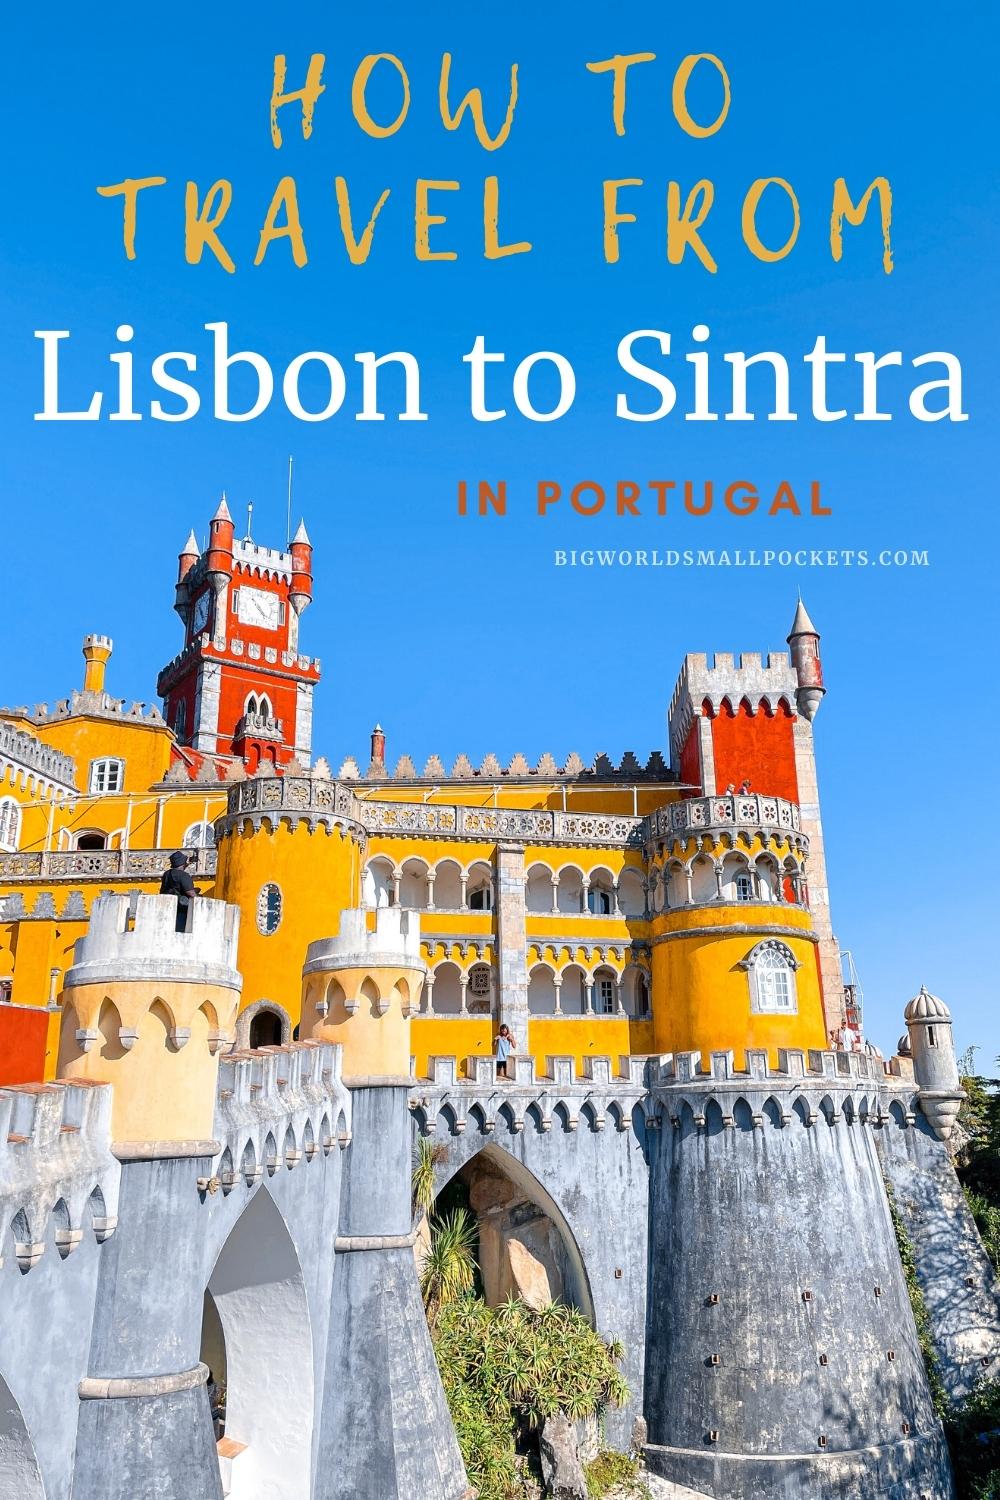 Lisbon to Sintra by Train Step-by-Step Guide